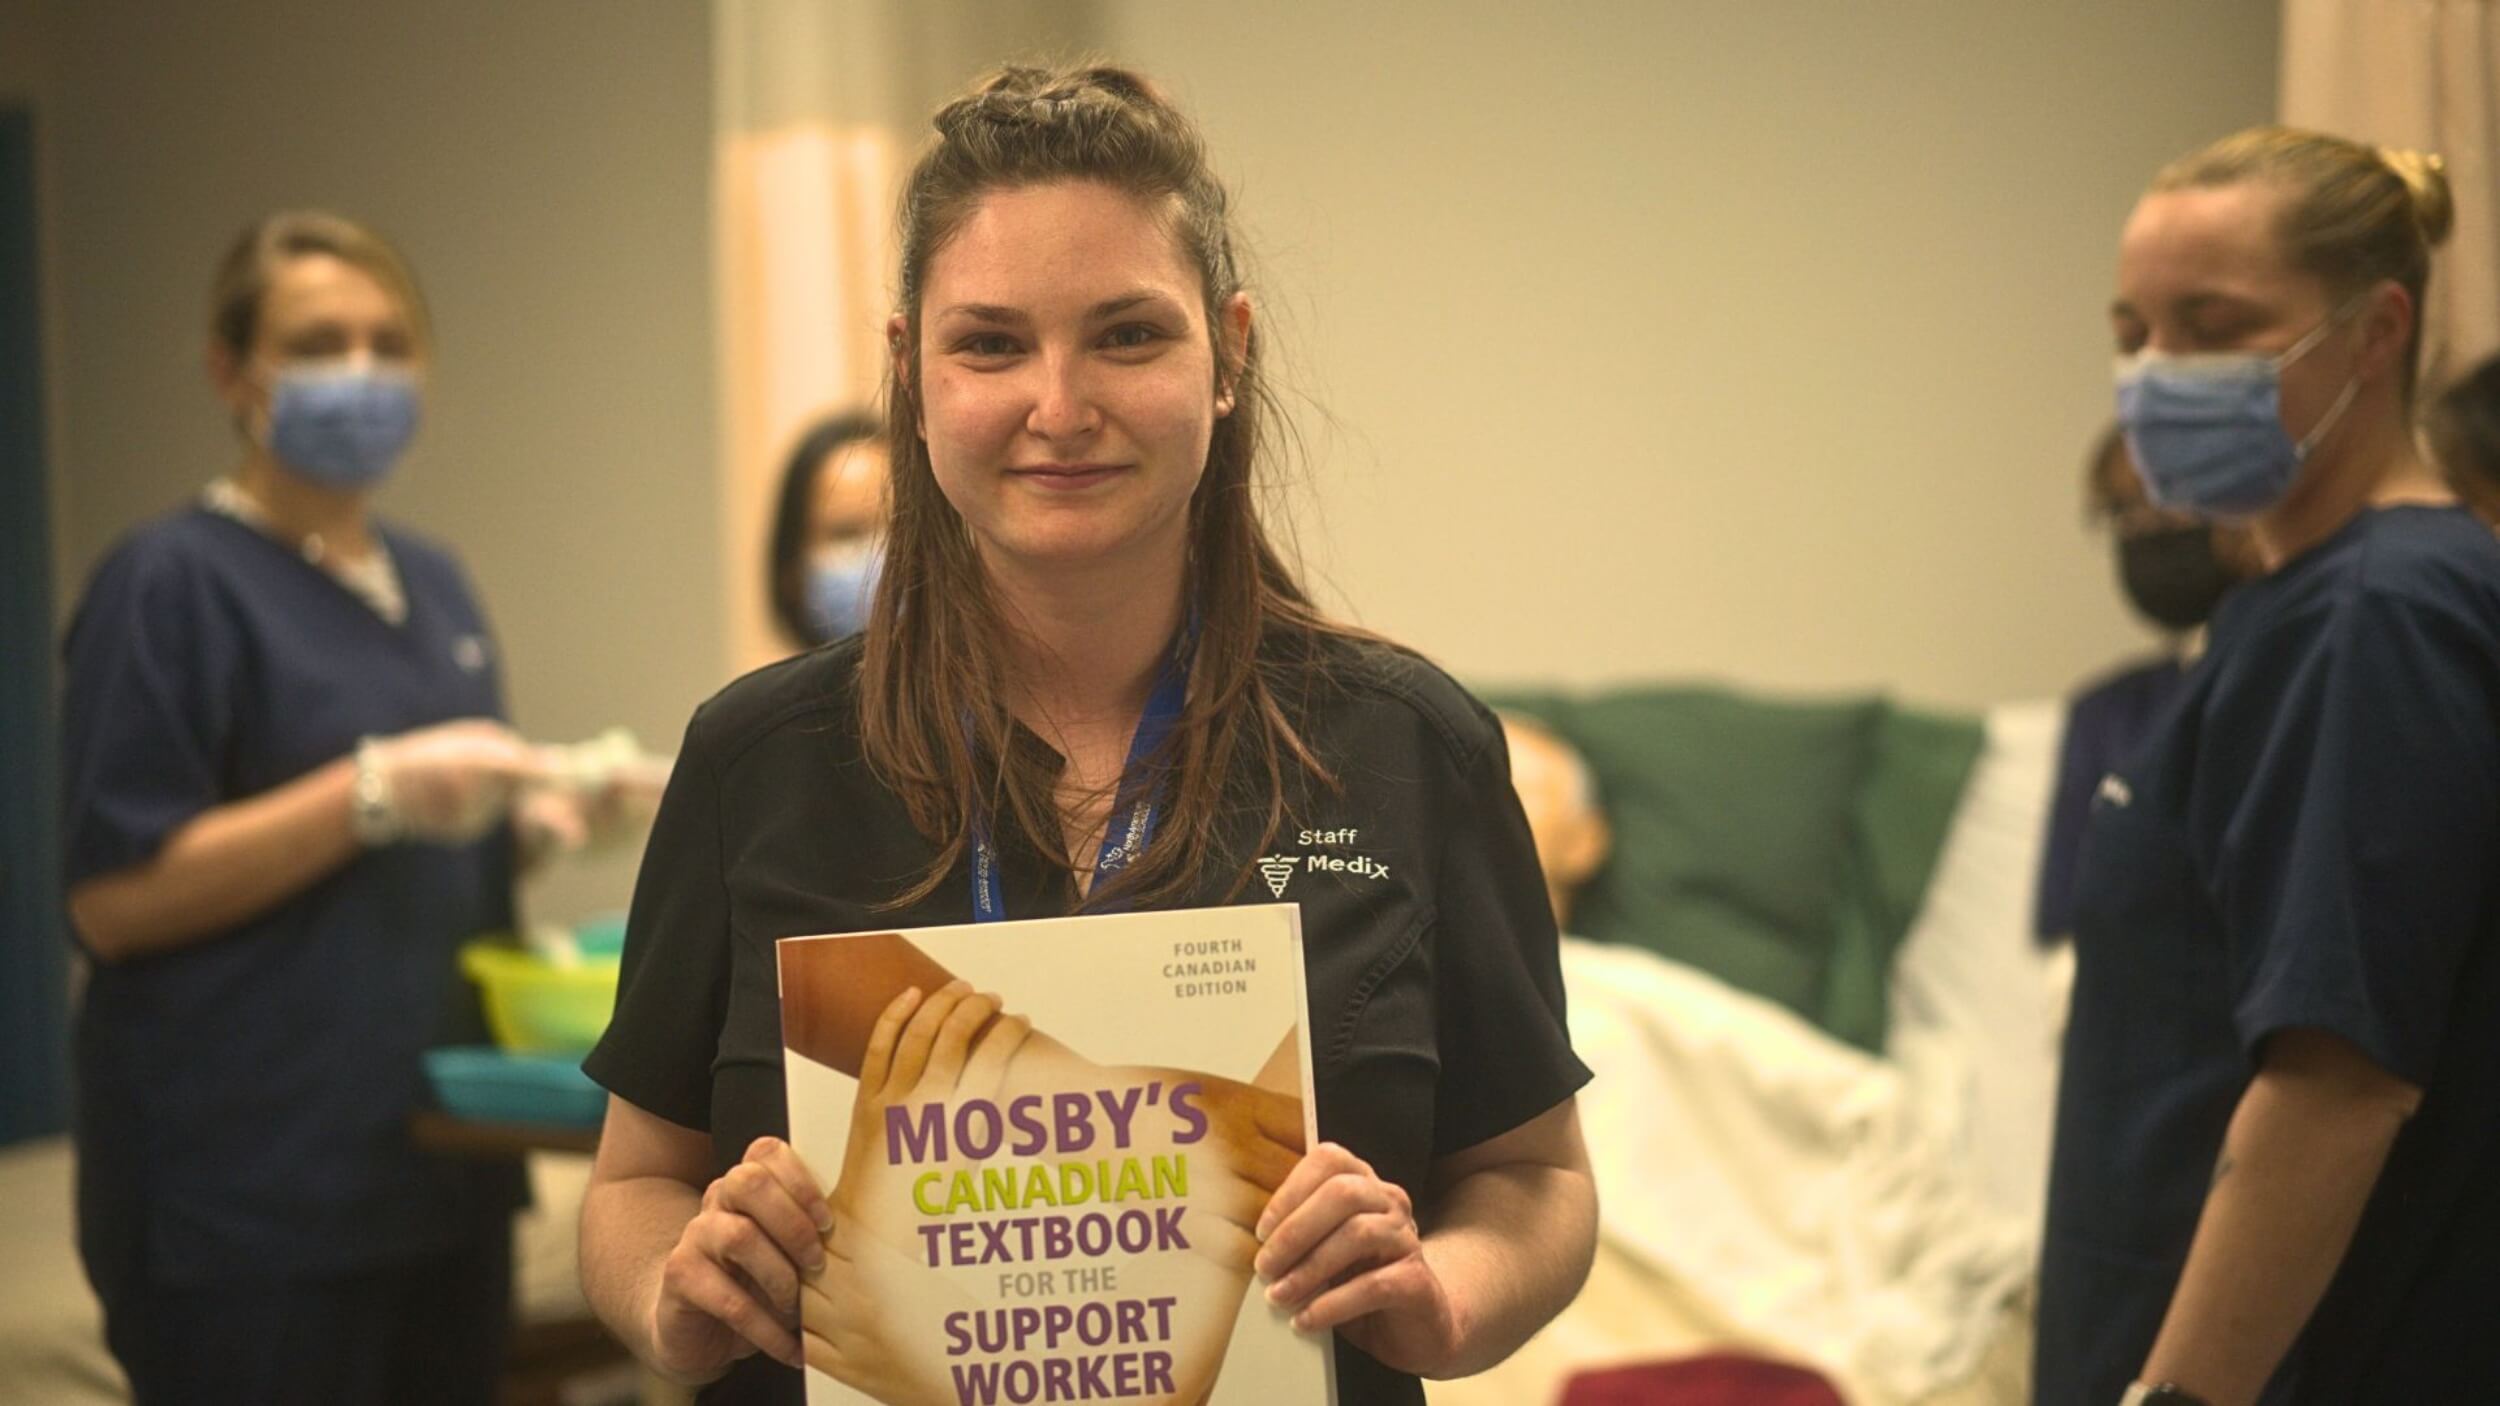 A smiling female personal support worker holding a personal support worker textbook during a practical class.